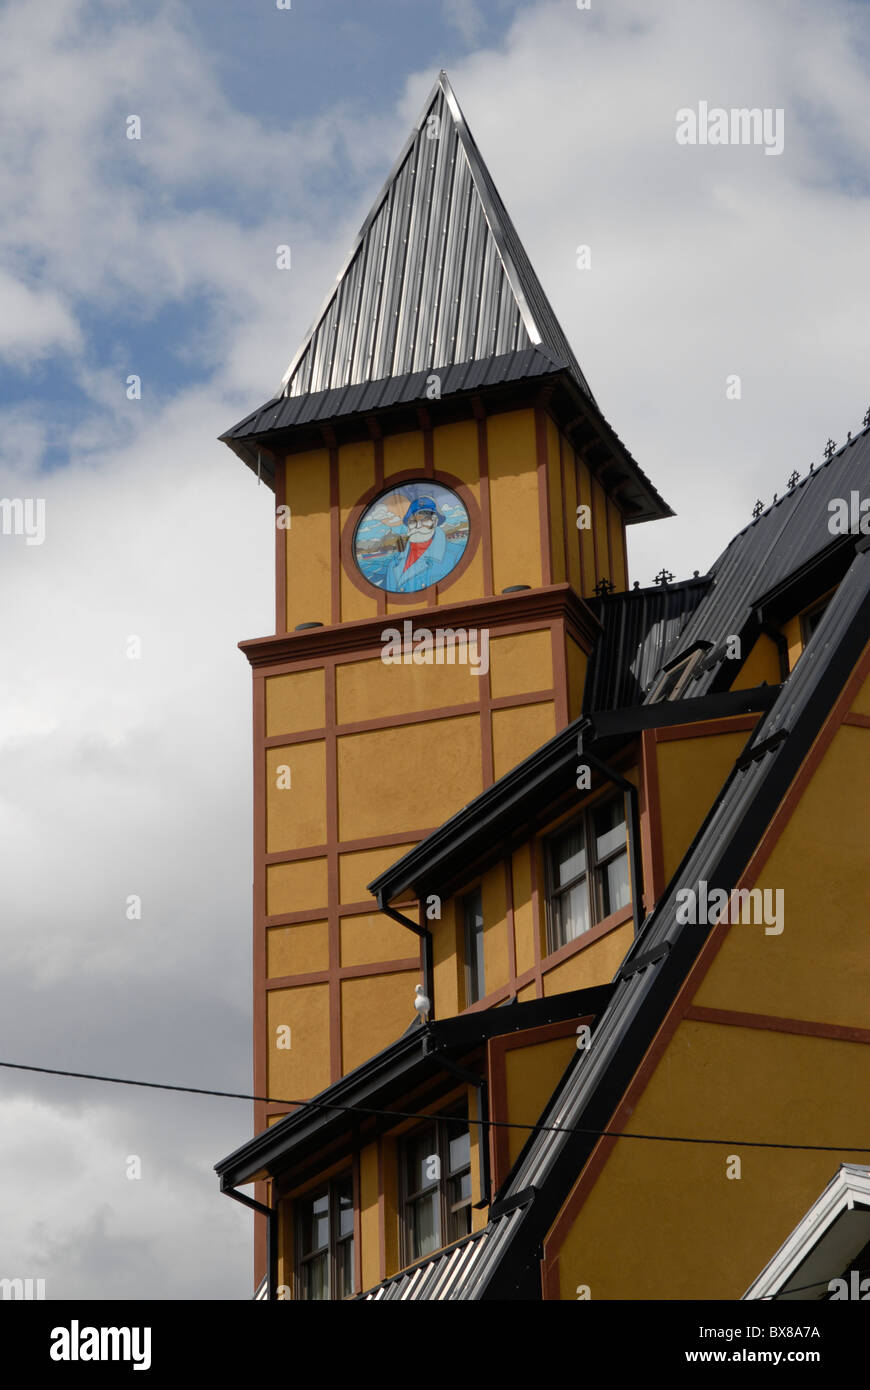 Colorful window of the clock tower and bank building, Ushuaia, Tierra del Fuego, Argentina Stock Photo